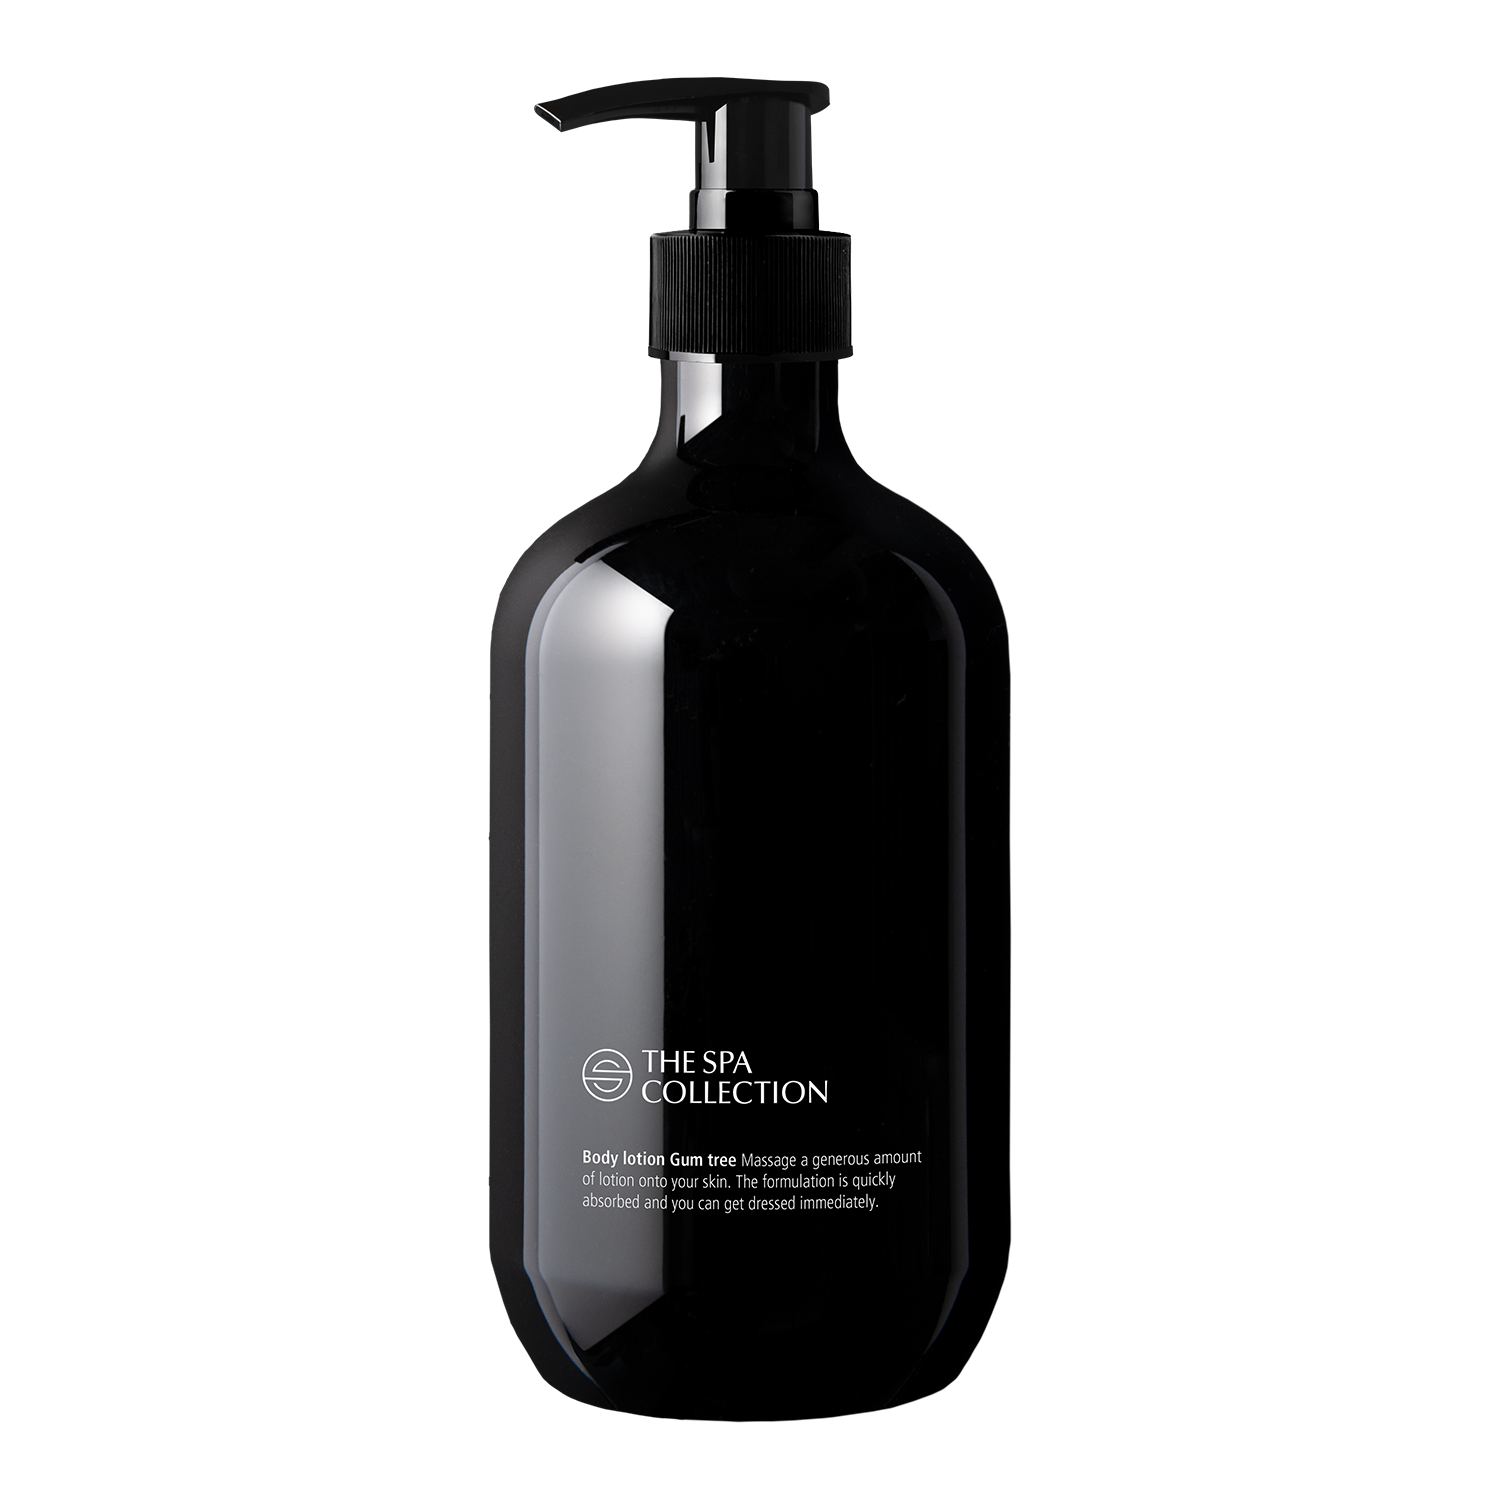 Hand and body lotion - 475ml recycled bottle - The Spa Collection Gum Tree